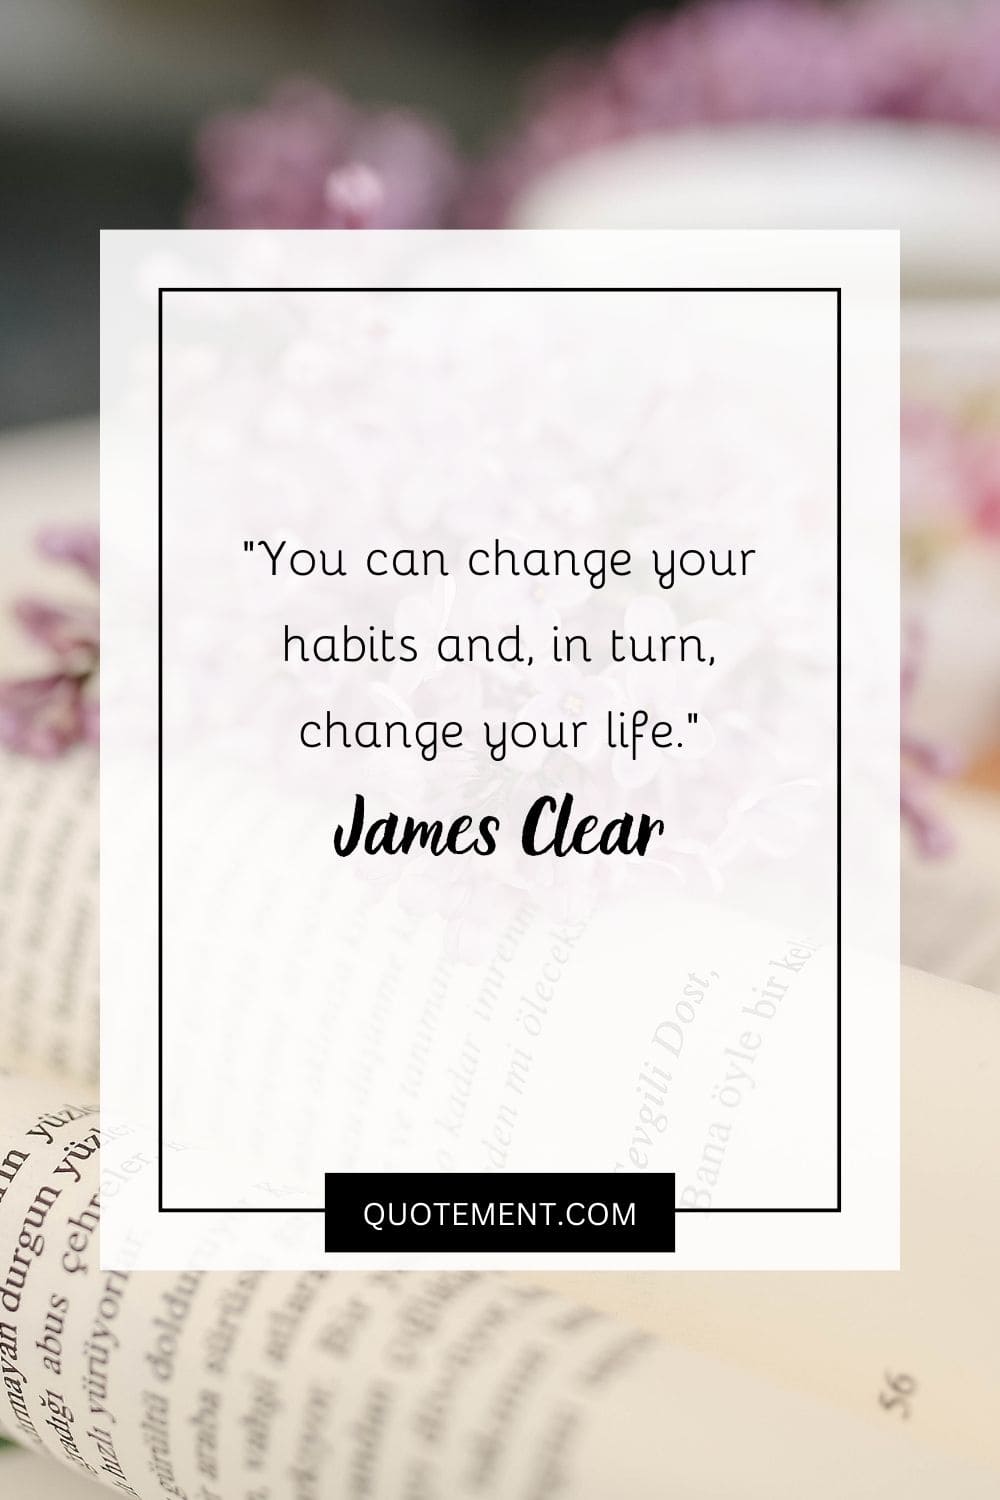 You can change your habits and, in turn, change your life.